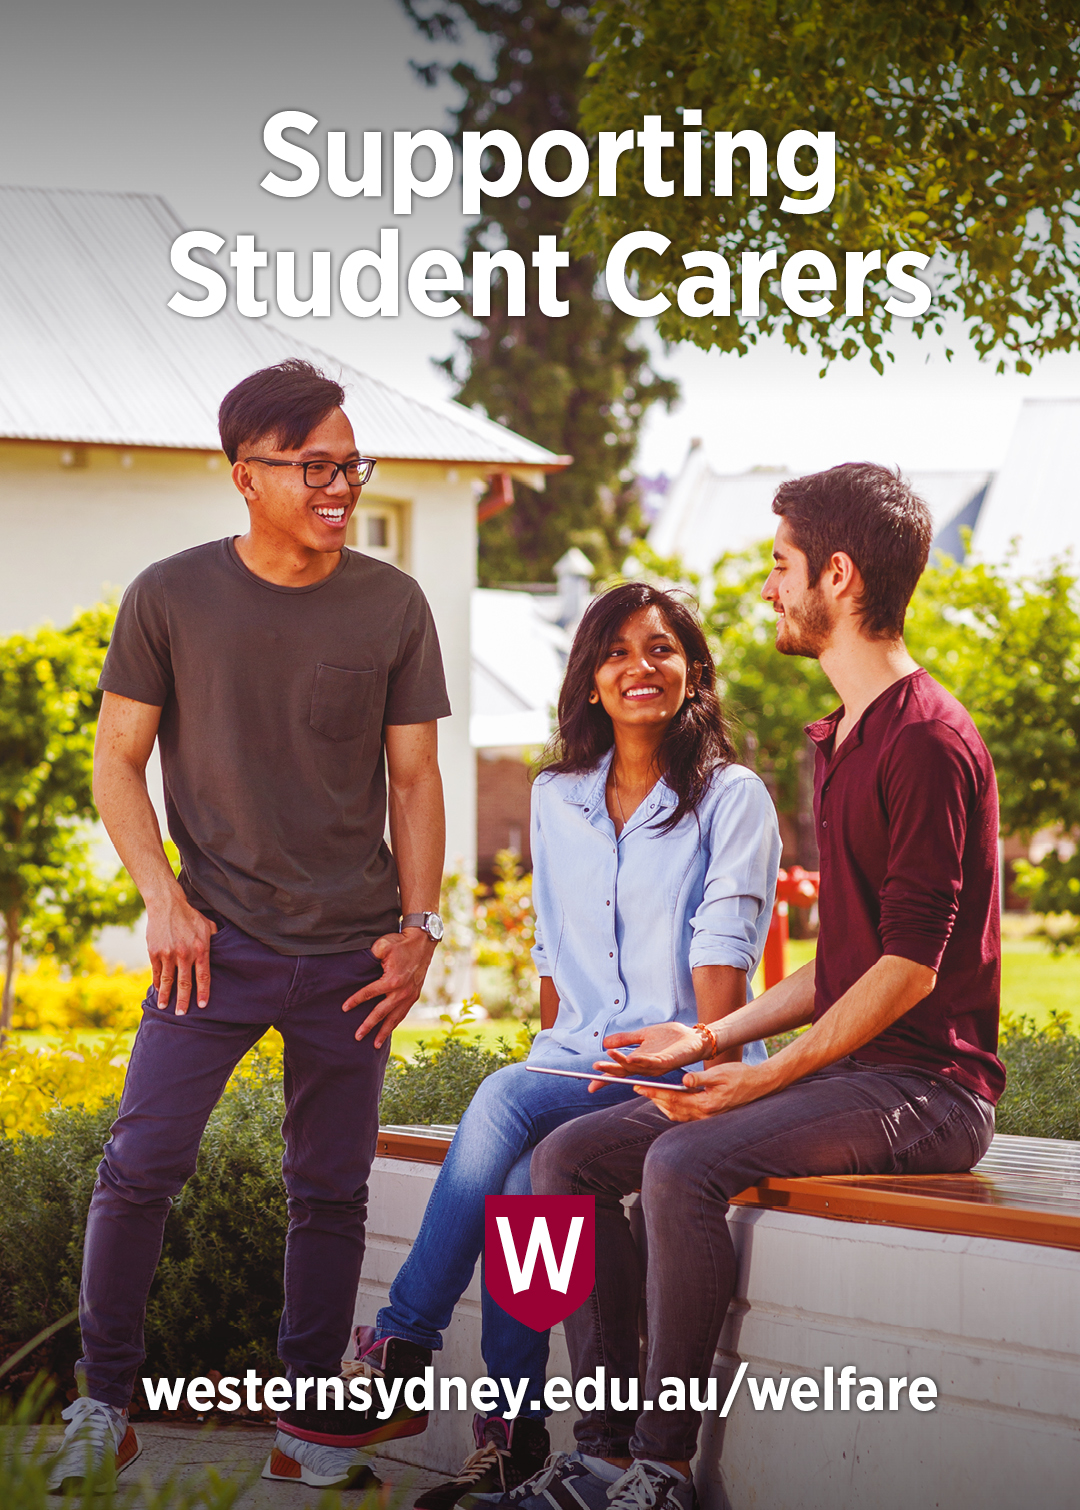 Support Student Carers